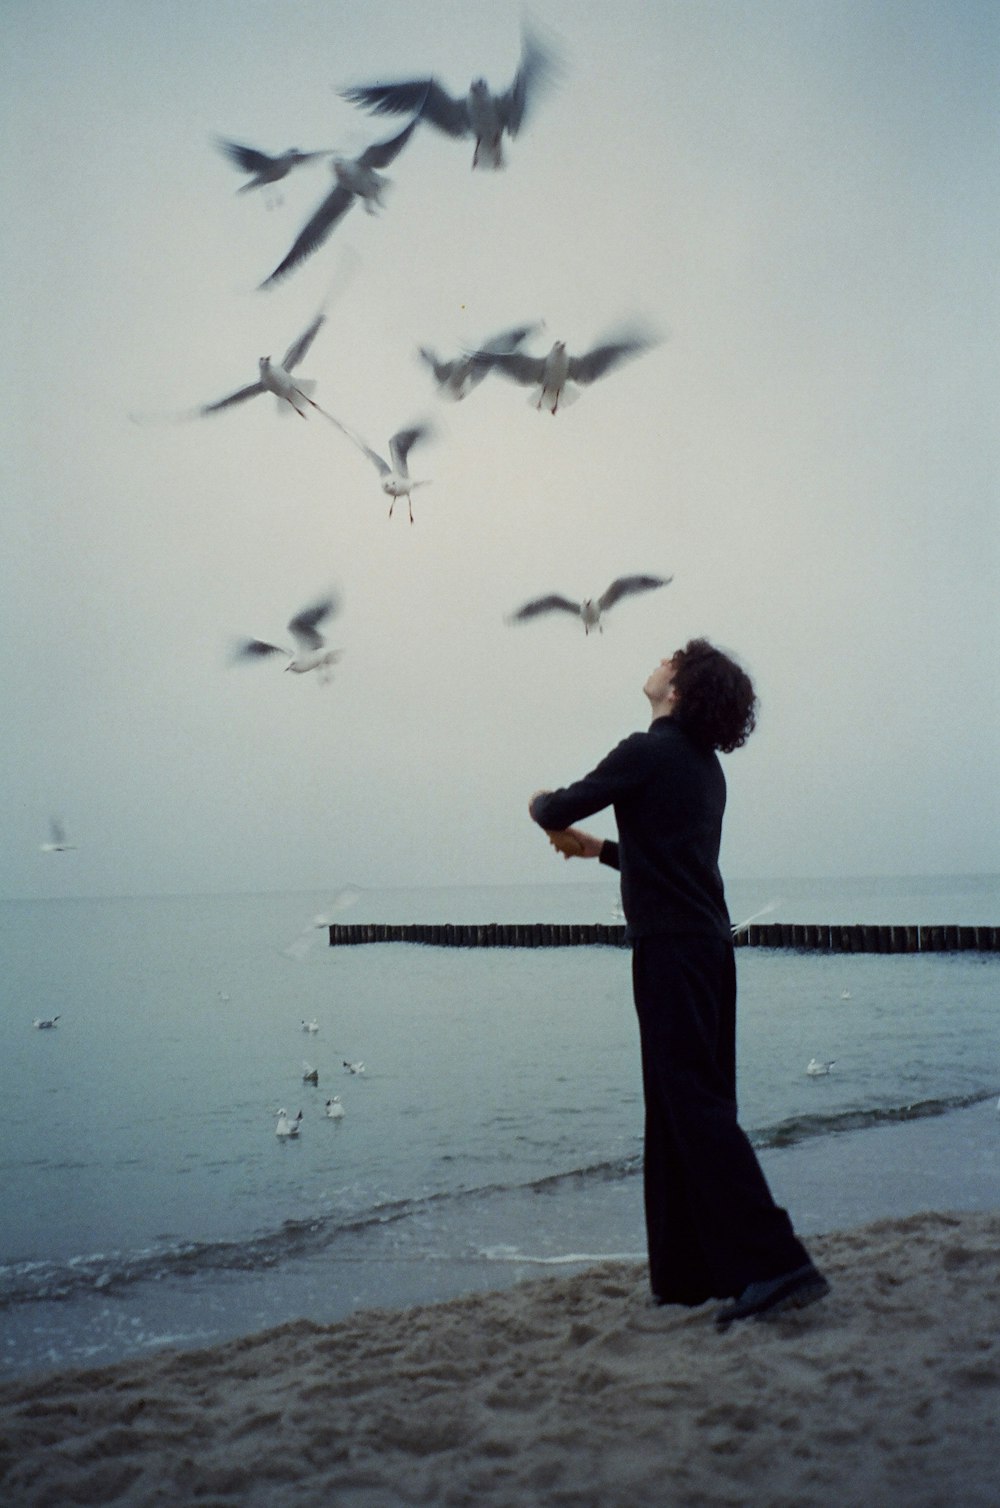 a person standing on a beach looking at birds flying in the sky